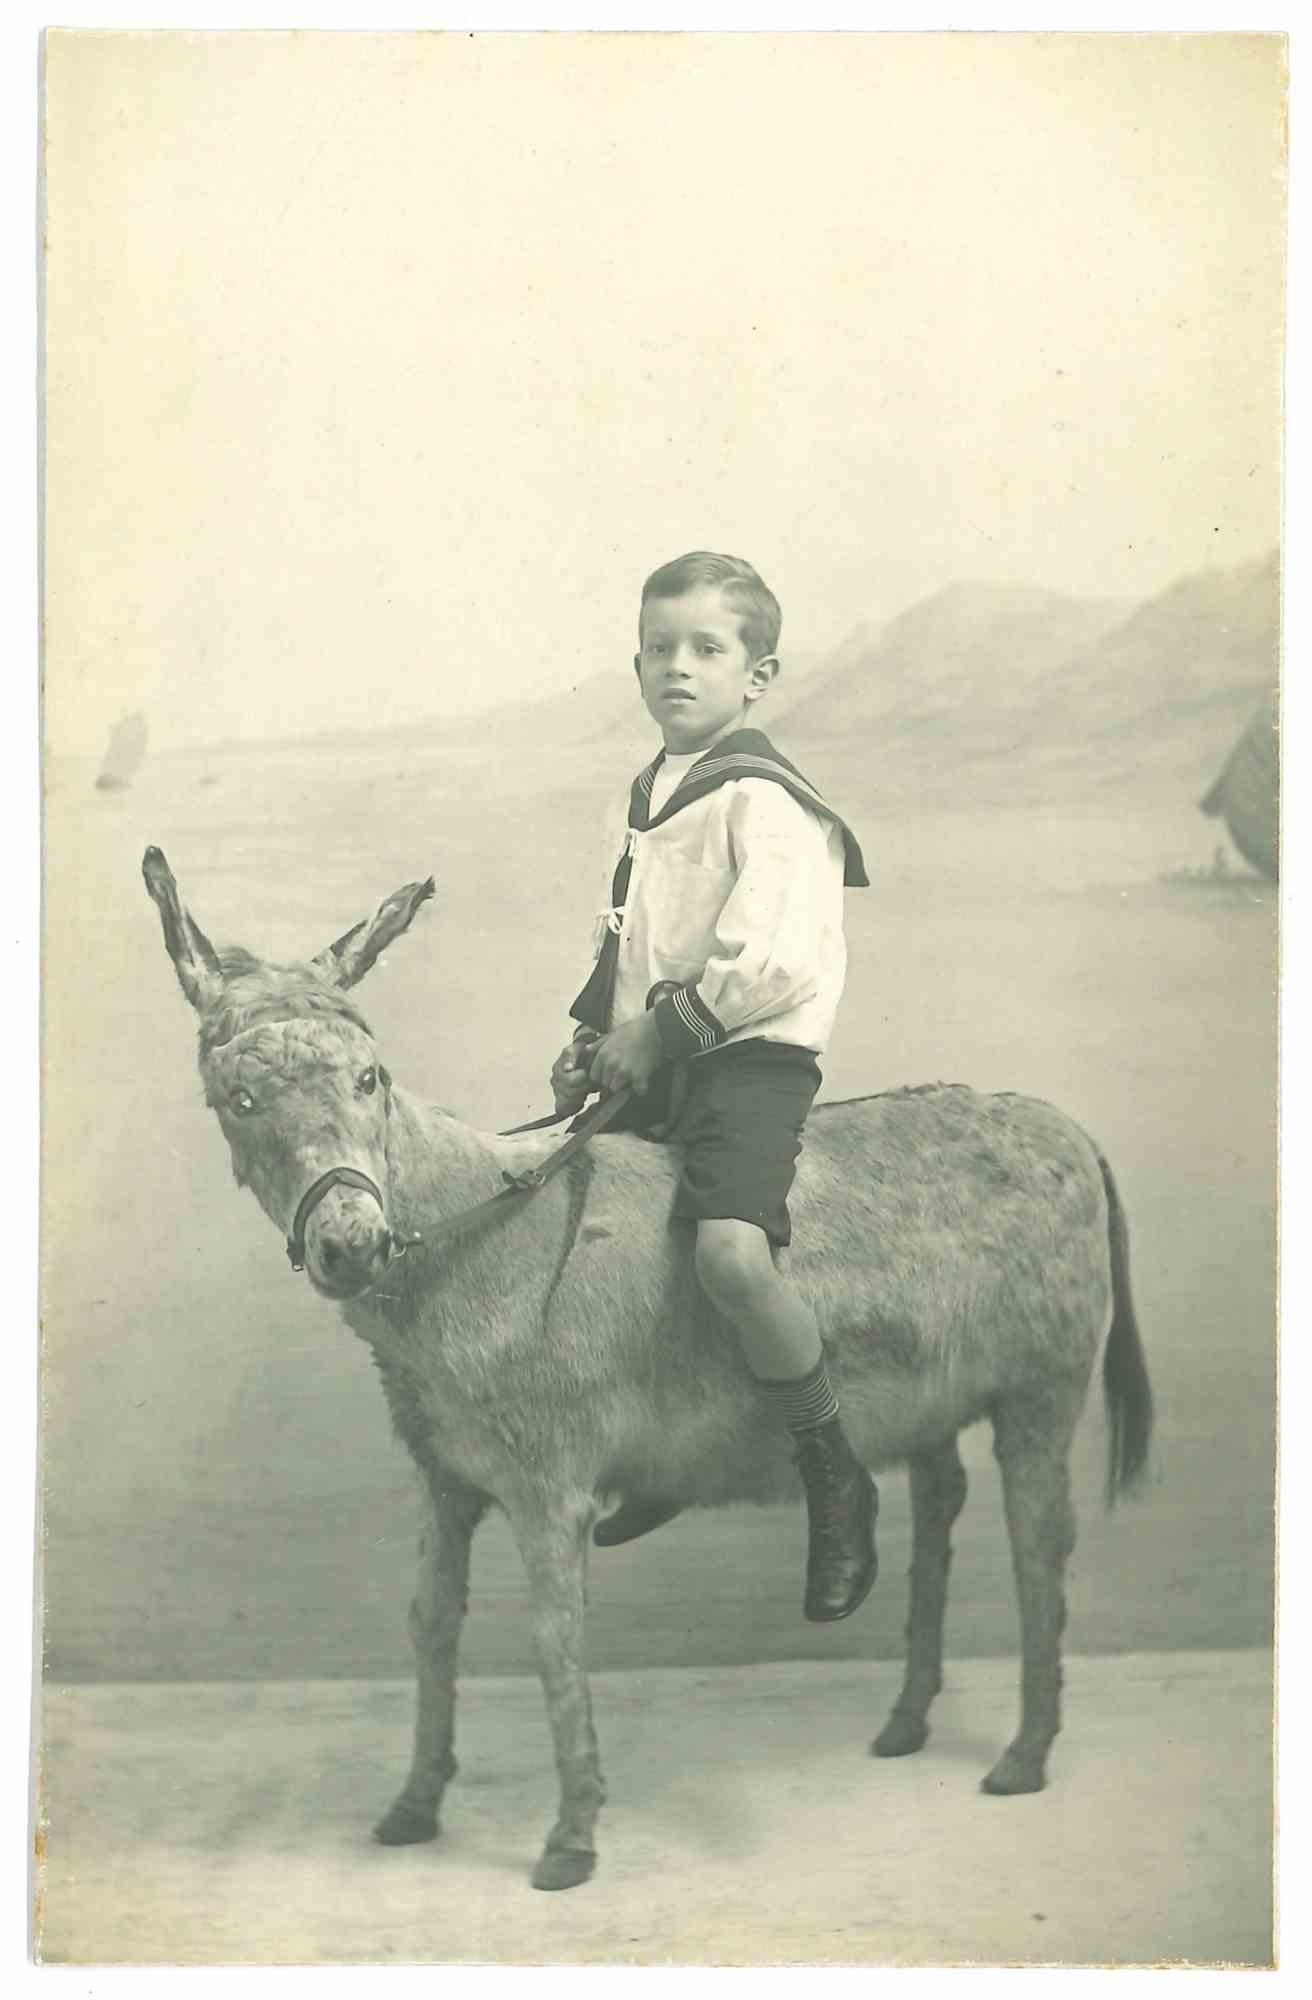 Unknown Landscape Photograph - Riding Boy - The Old Days - Early 20th Century